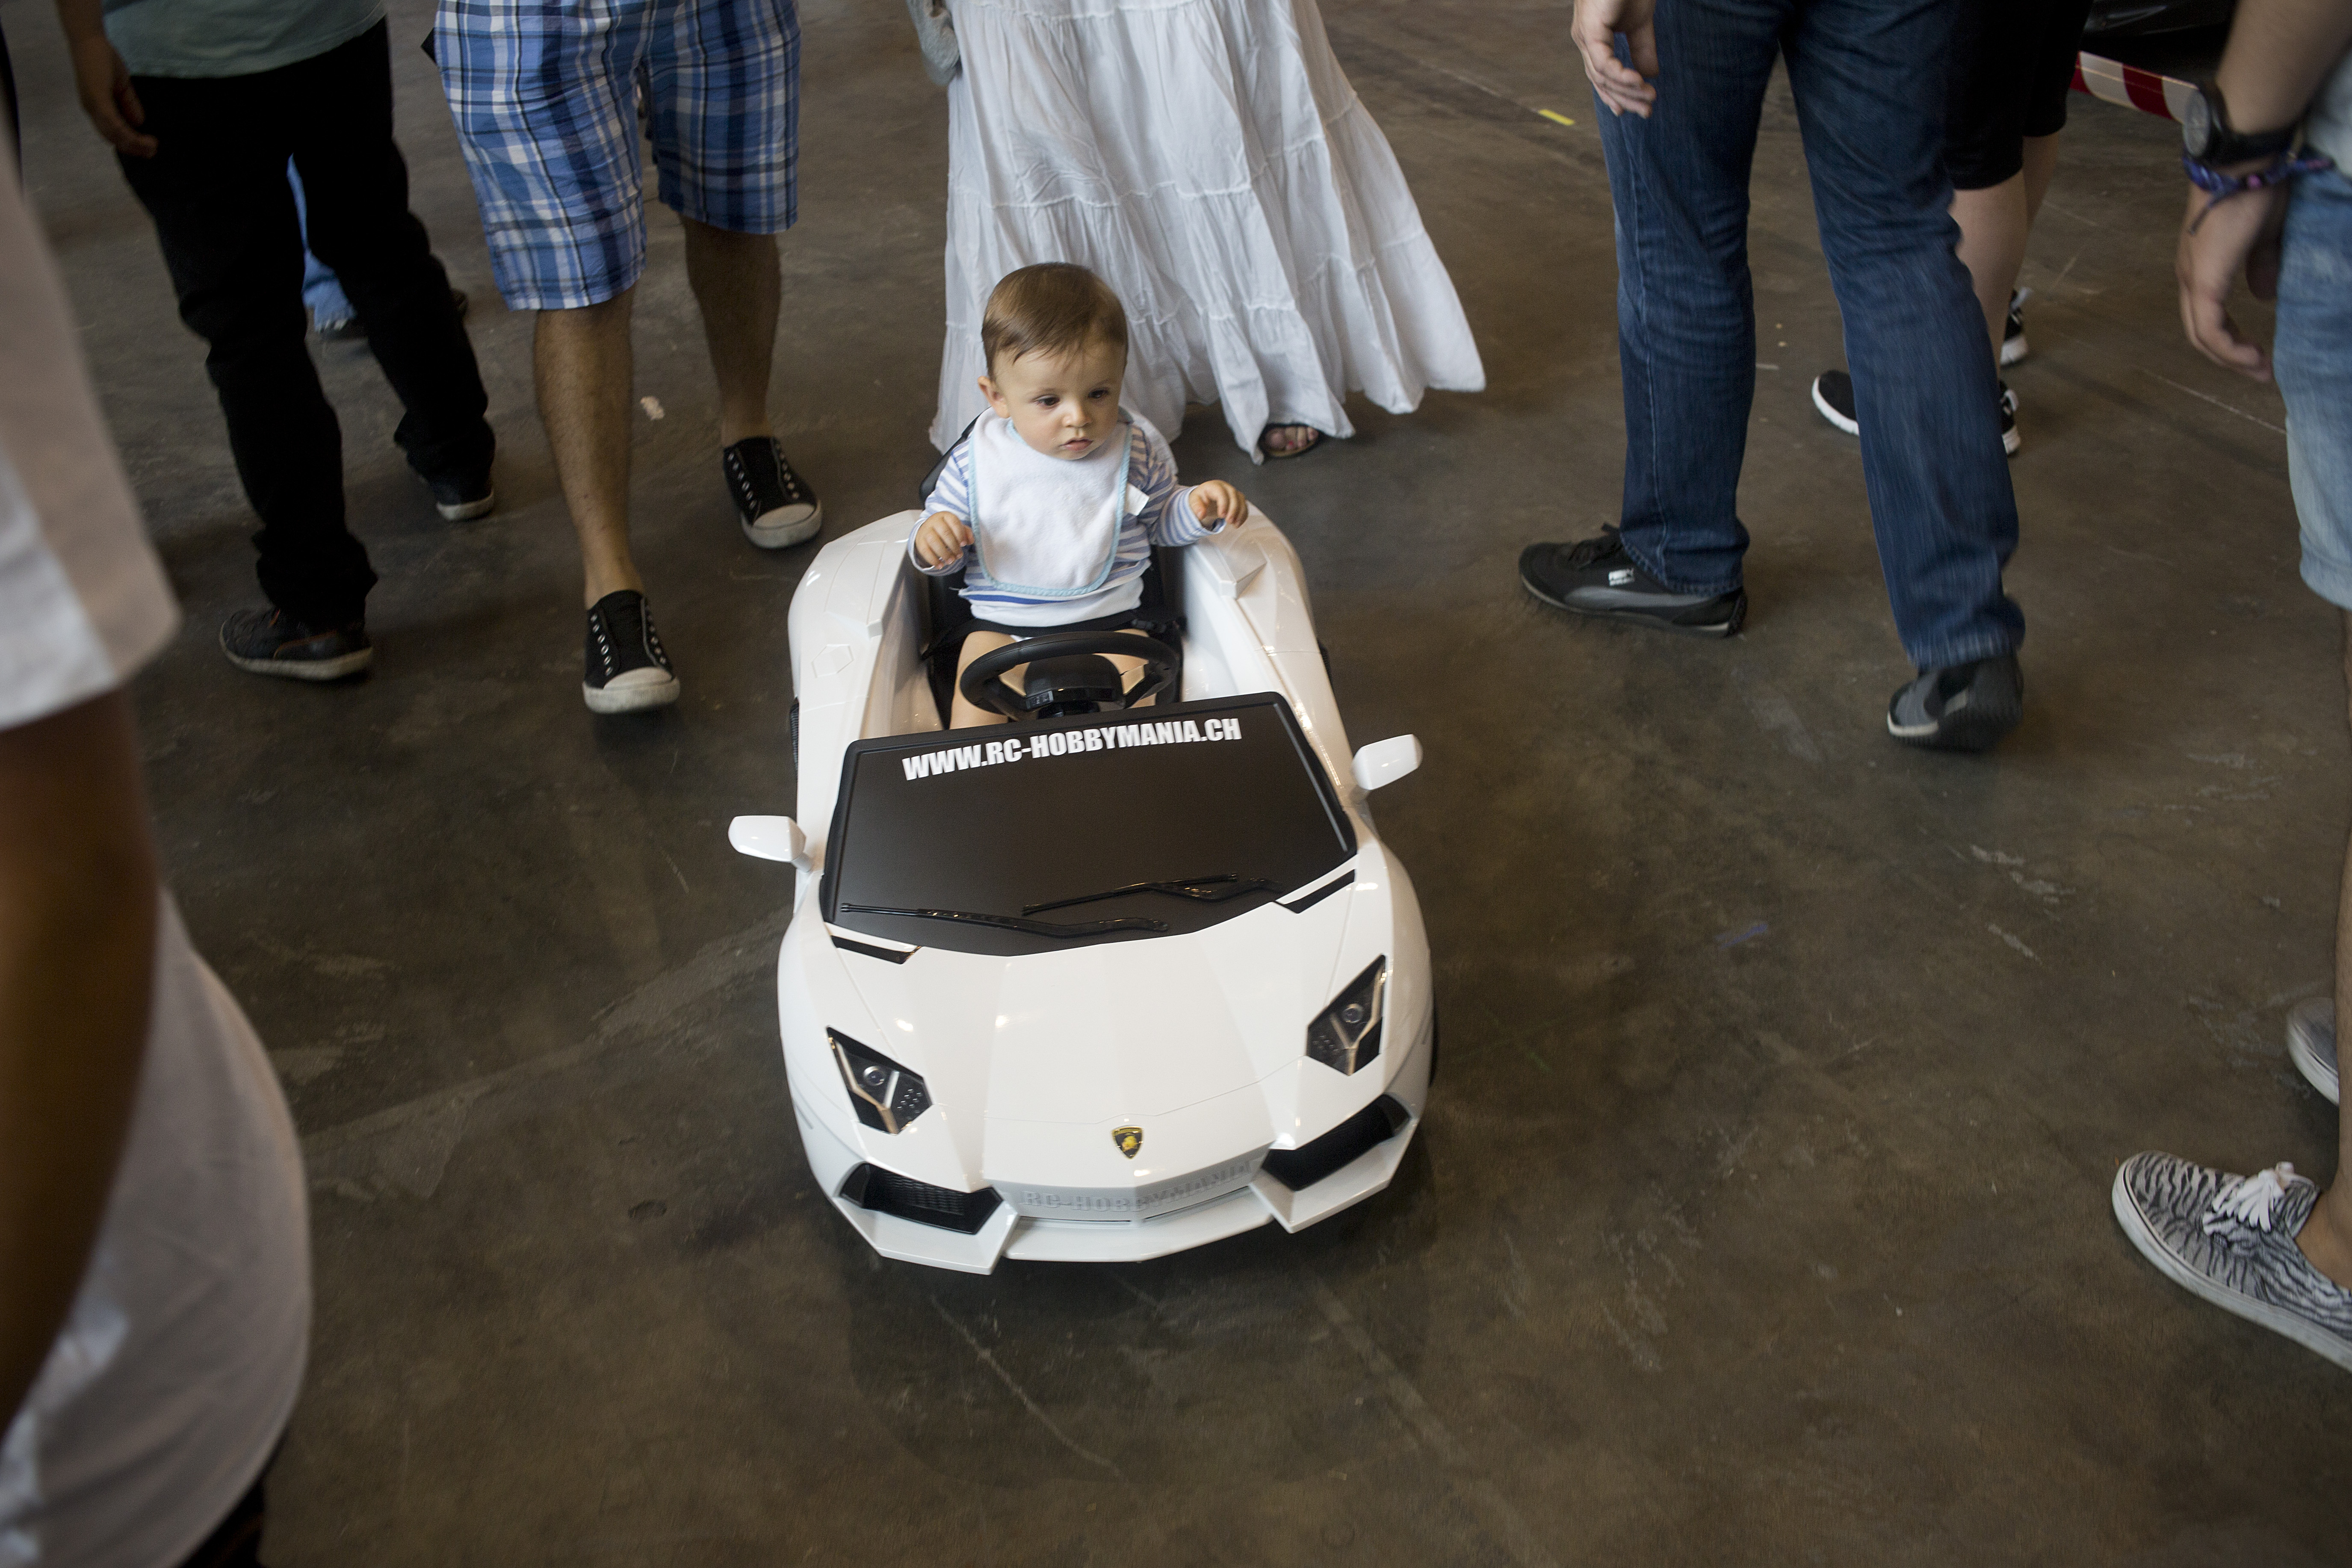 A baby in a toy car